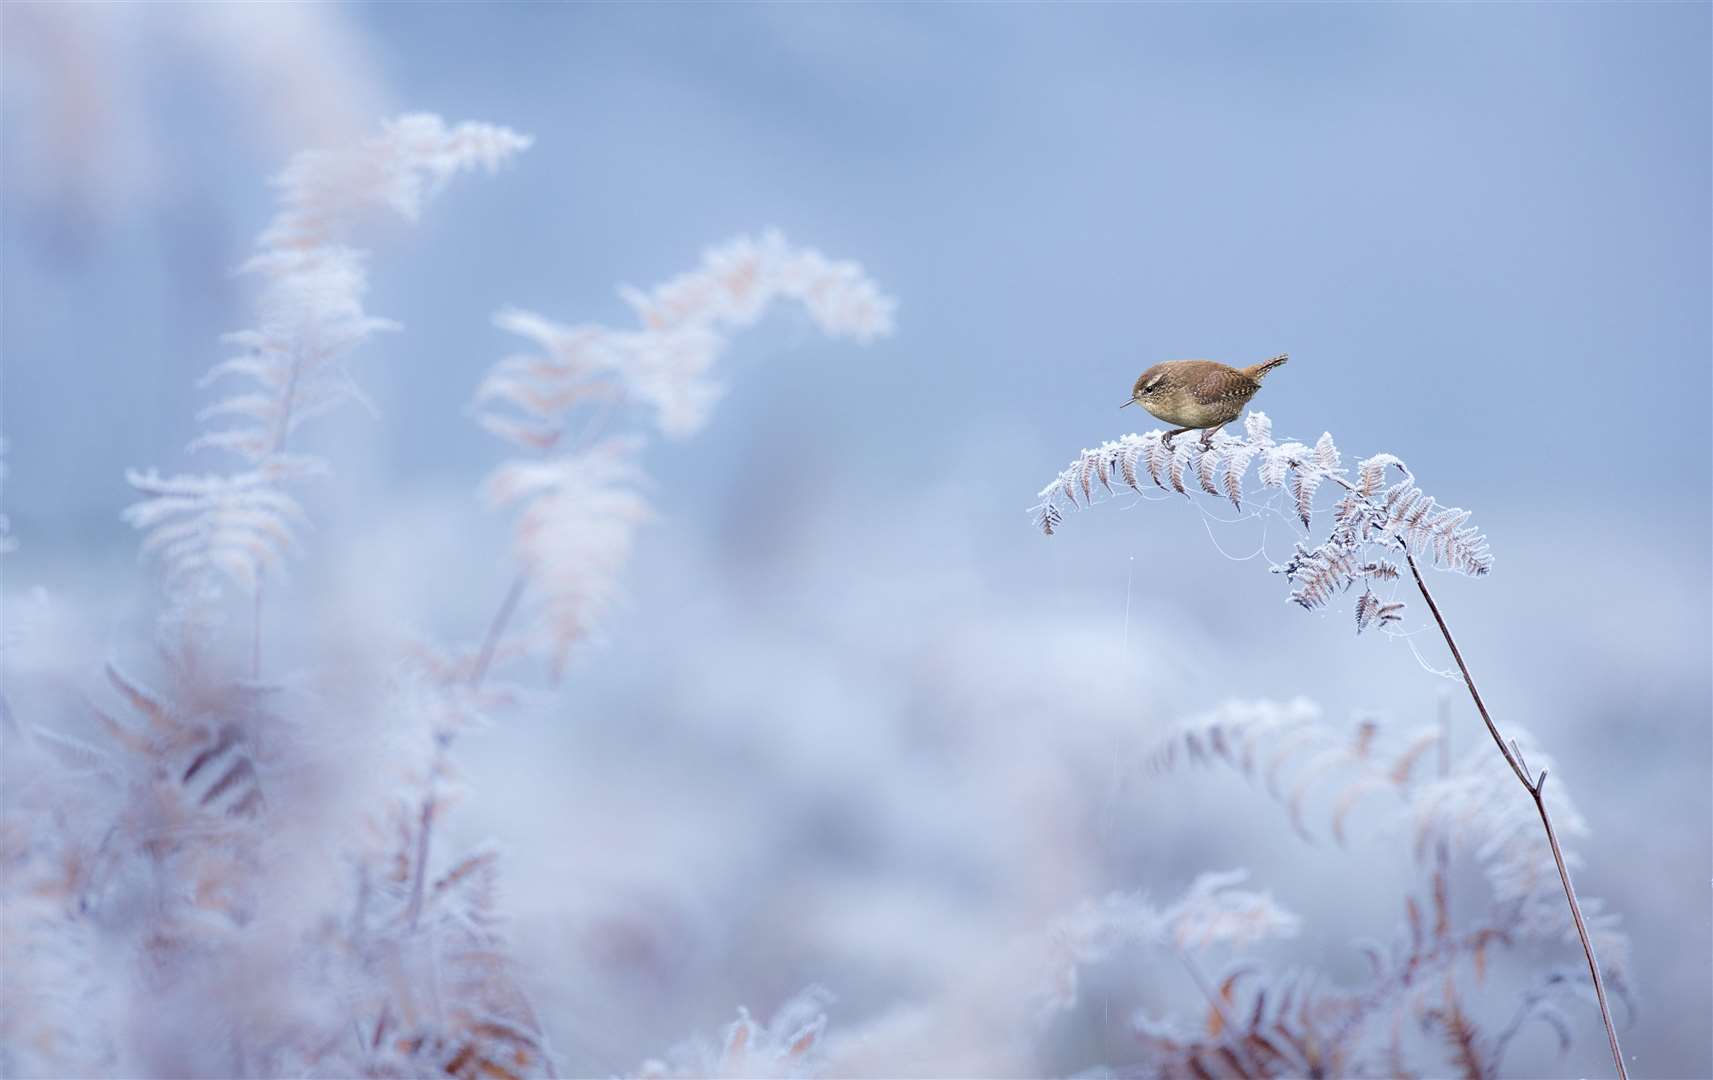 Wren on Frost-Encrusted fern, Durham Massey, Cheshire Picture: Ben Hall (BWPA)